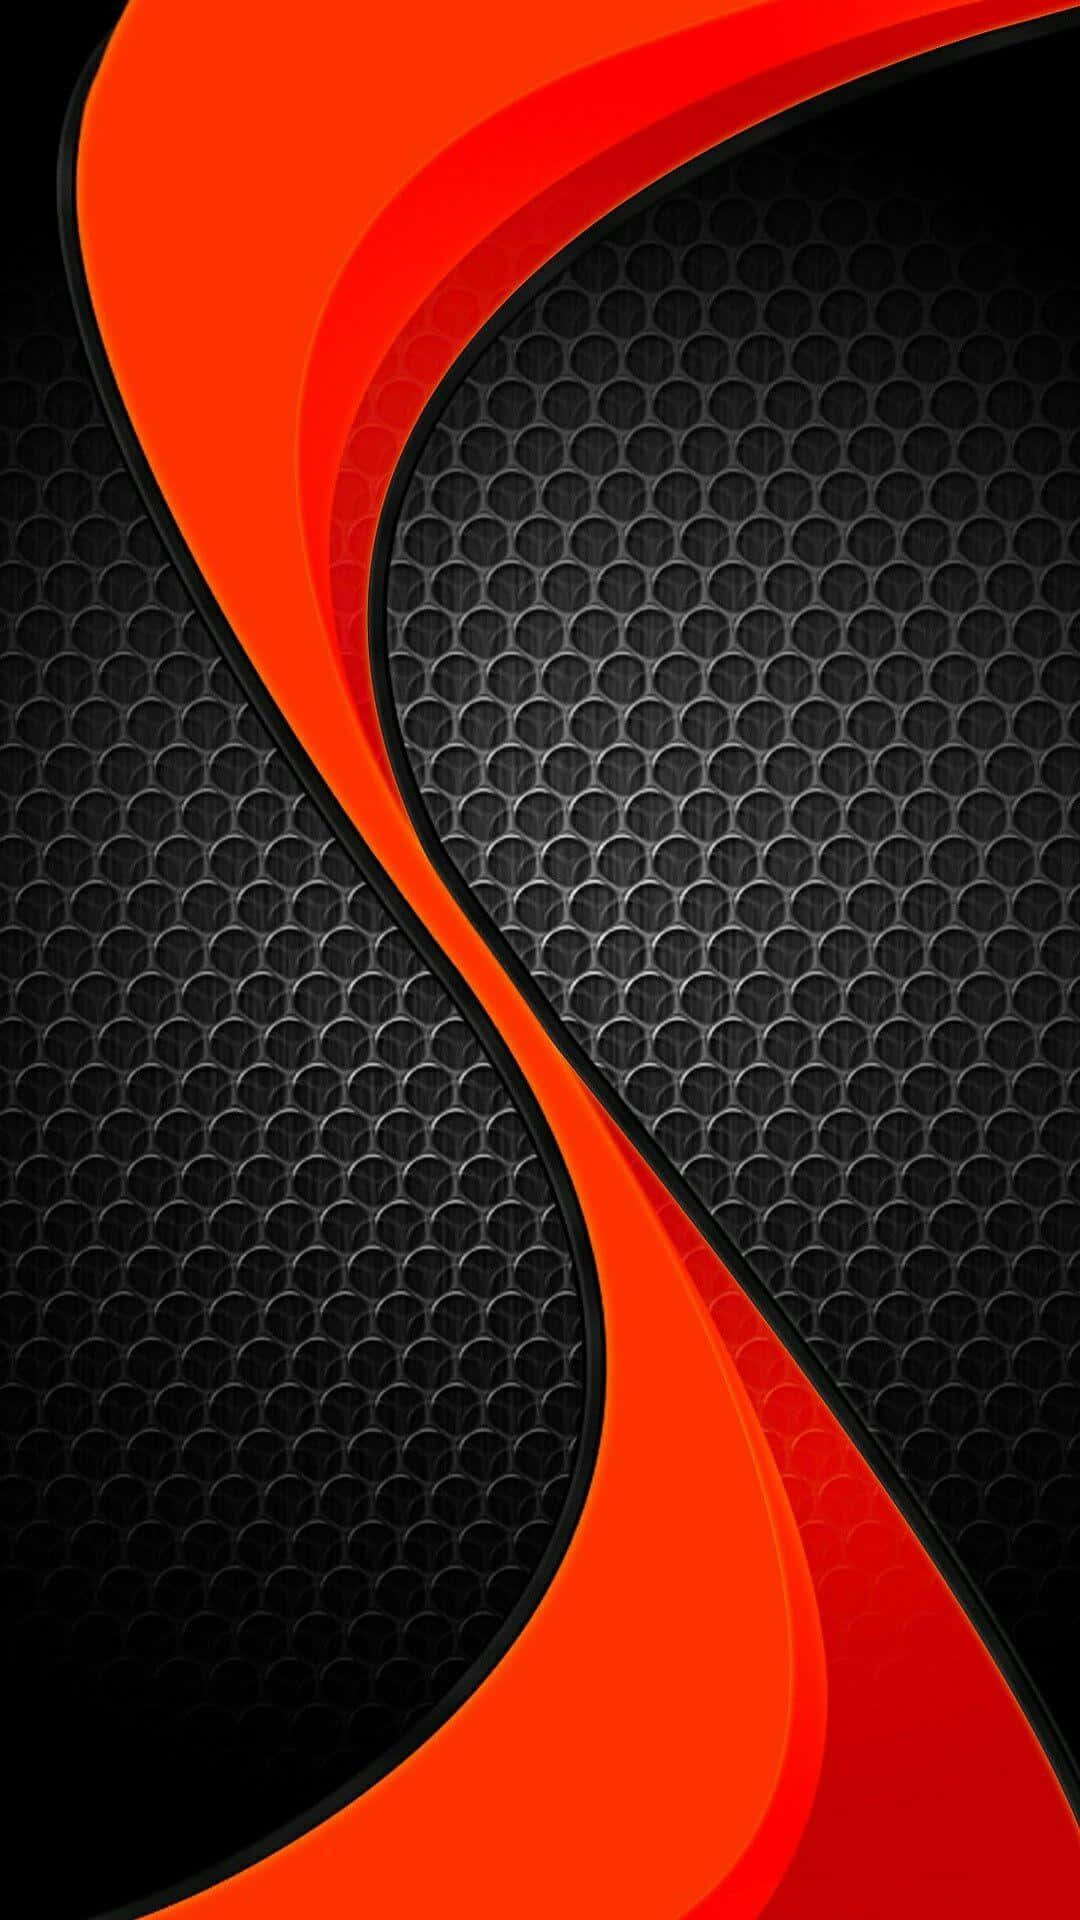 An Orange And Black Background With A Wavy Pattern